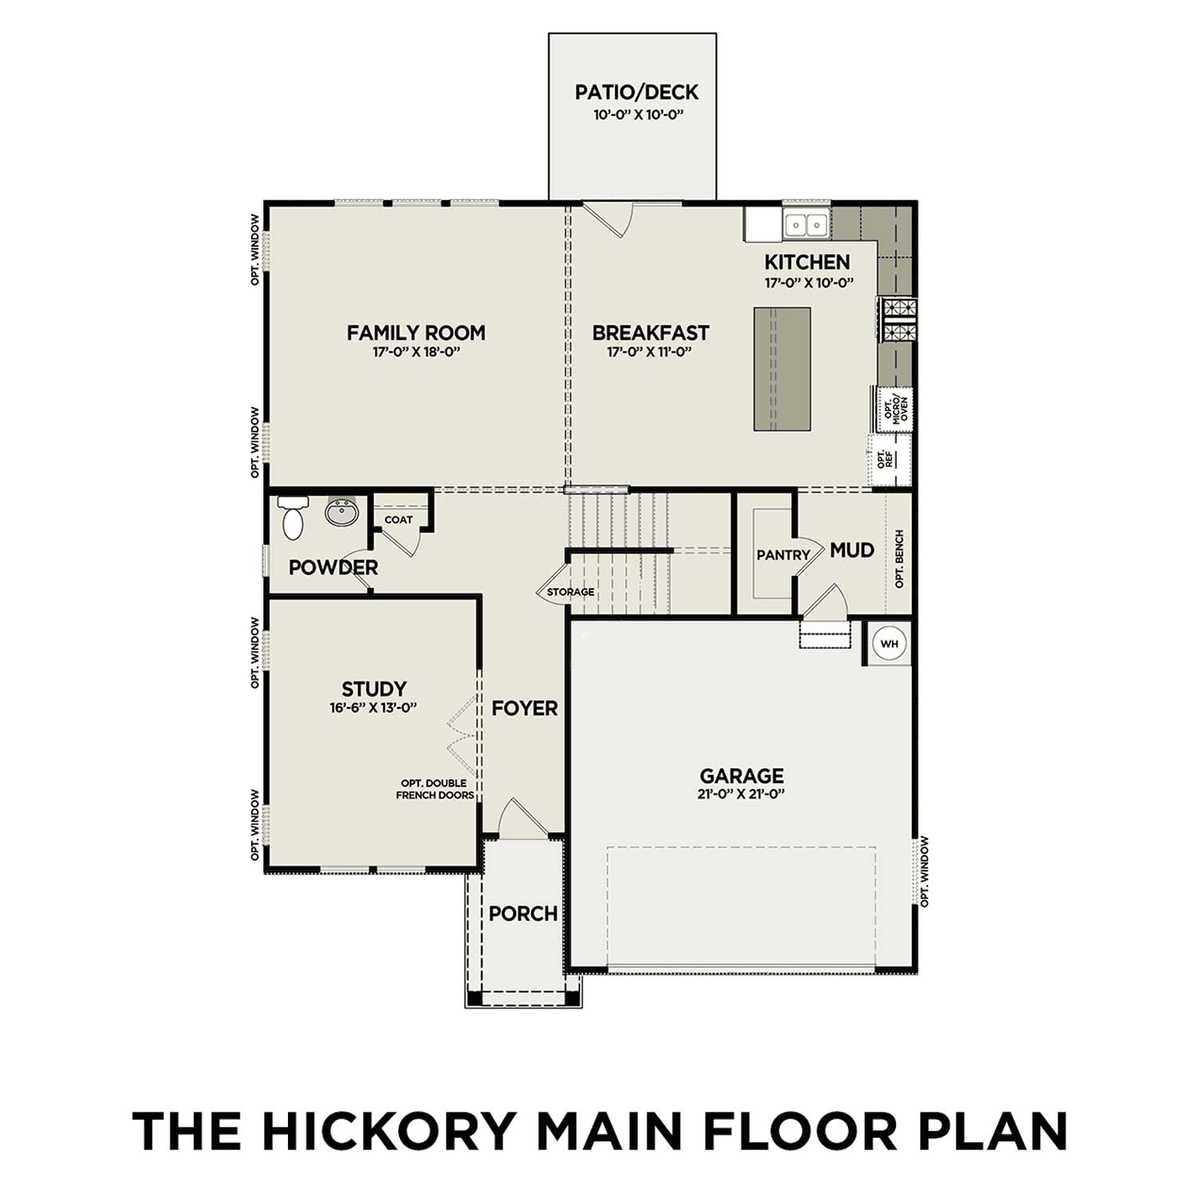 1 - The Hickory E floor plan layout for 261 Gulfstream Dr in Davidson Homes' Carellton community.